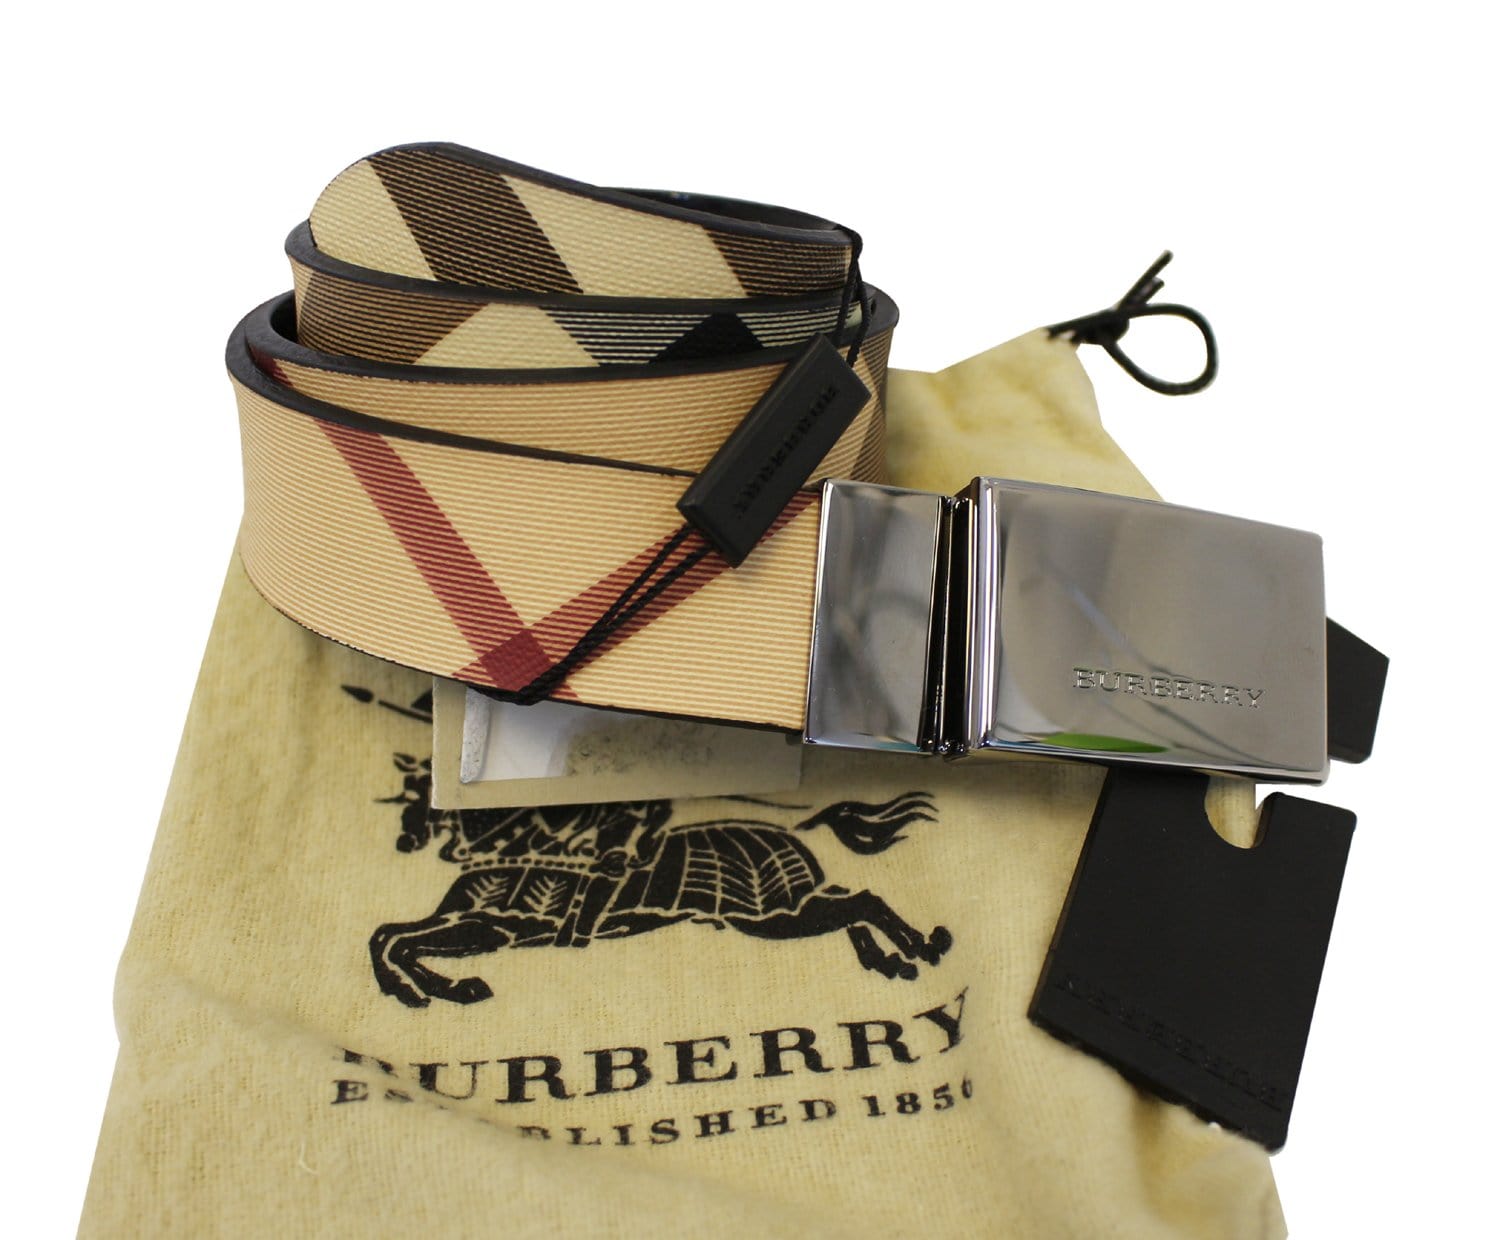 Burberry Horse Ferry Check Belt - Size 30 / 75, Burberry Accessories